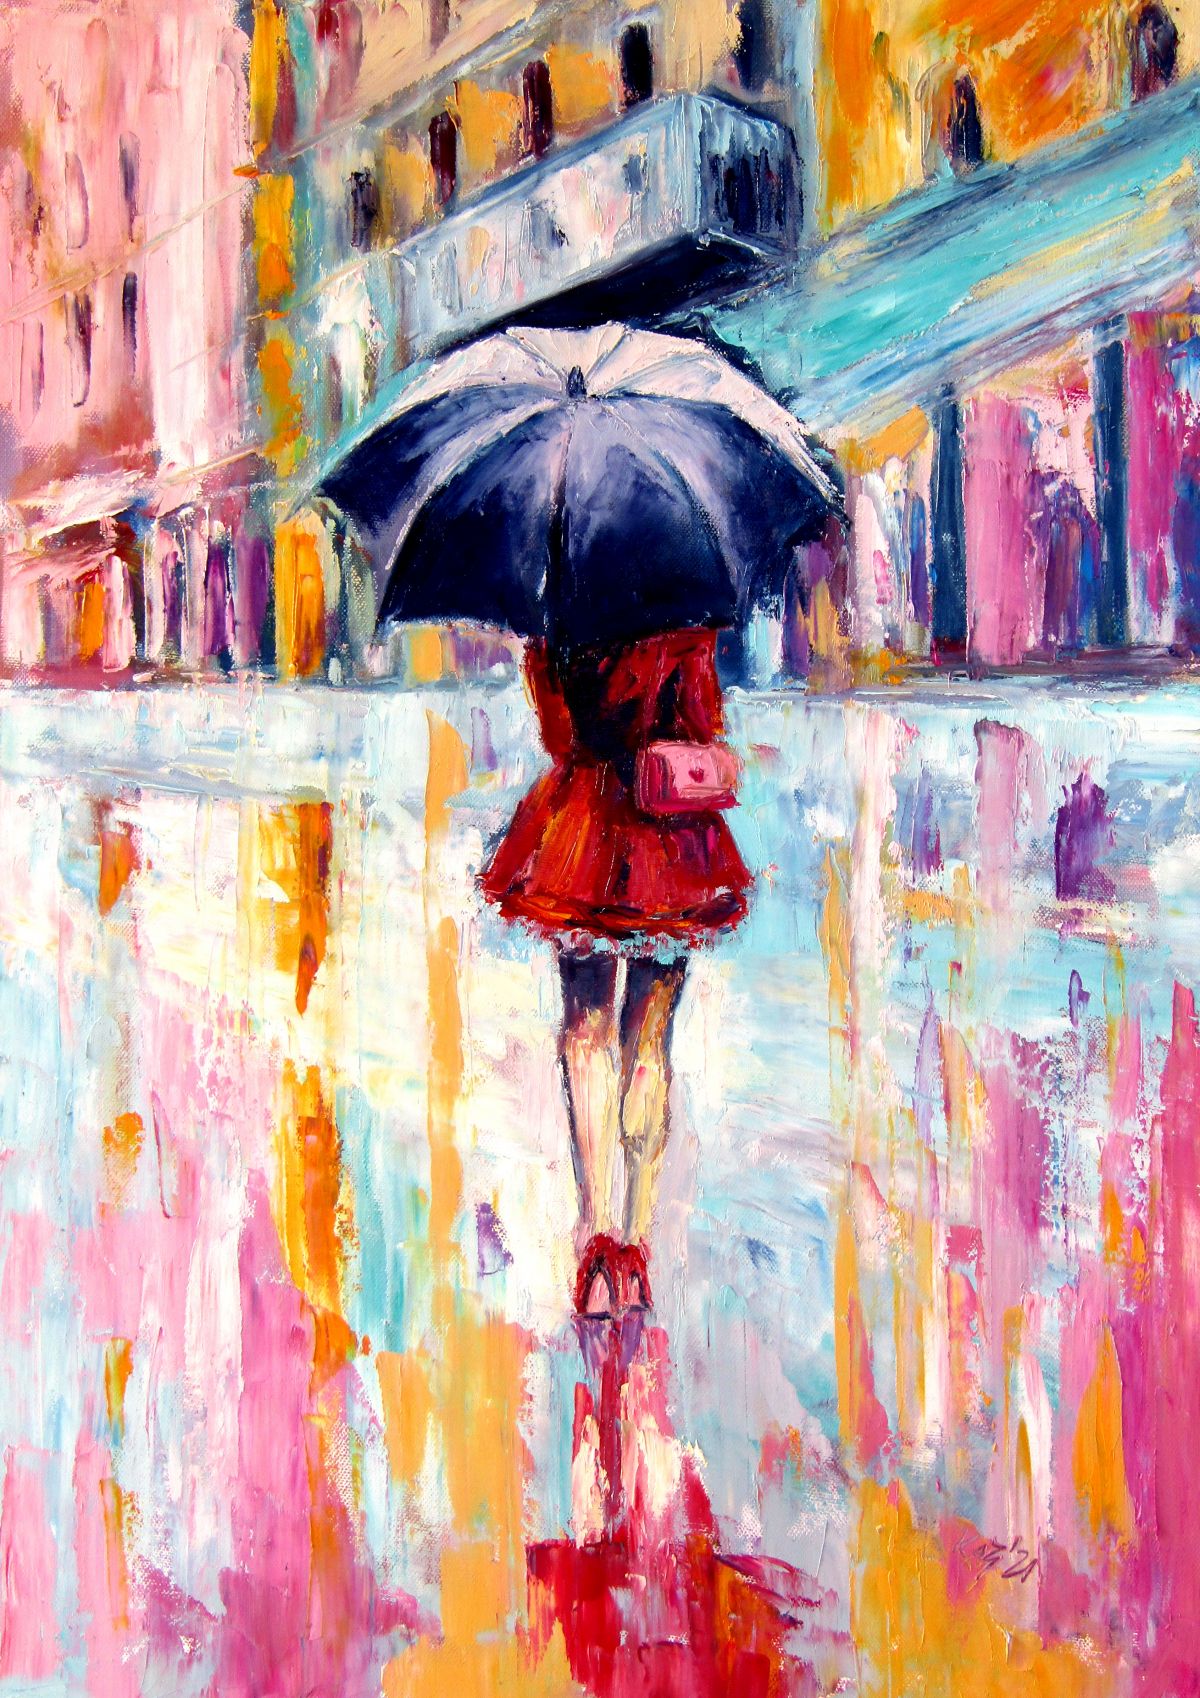 Rainy day in the city II Painting Photo